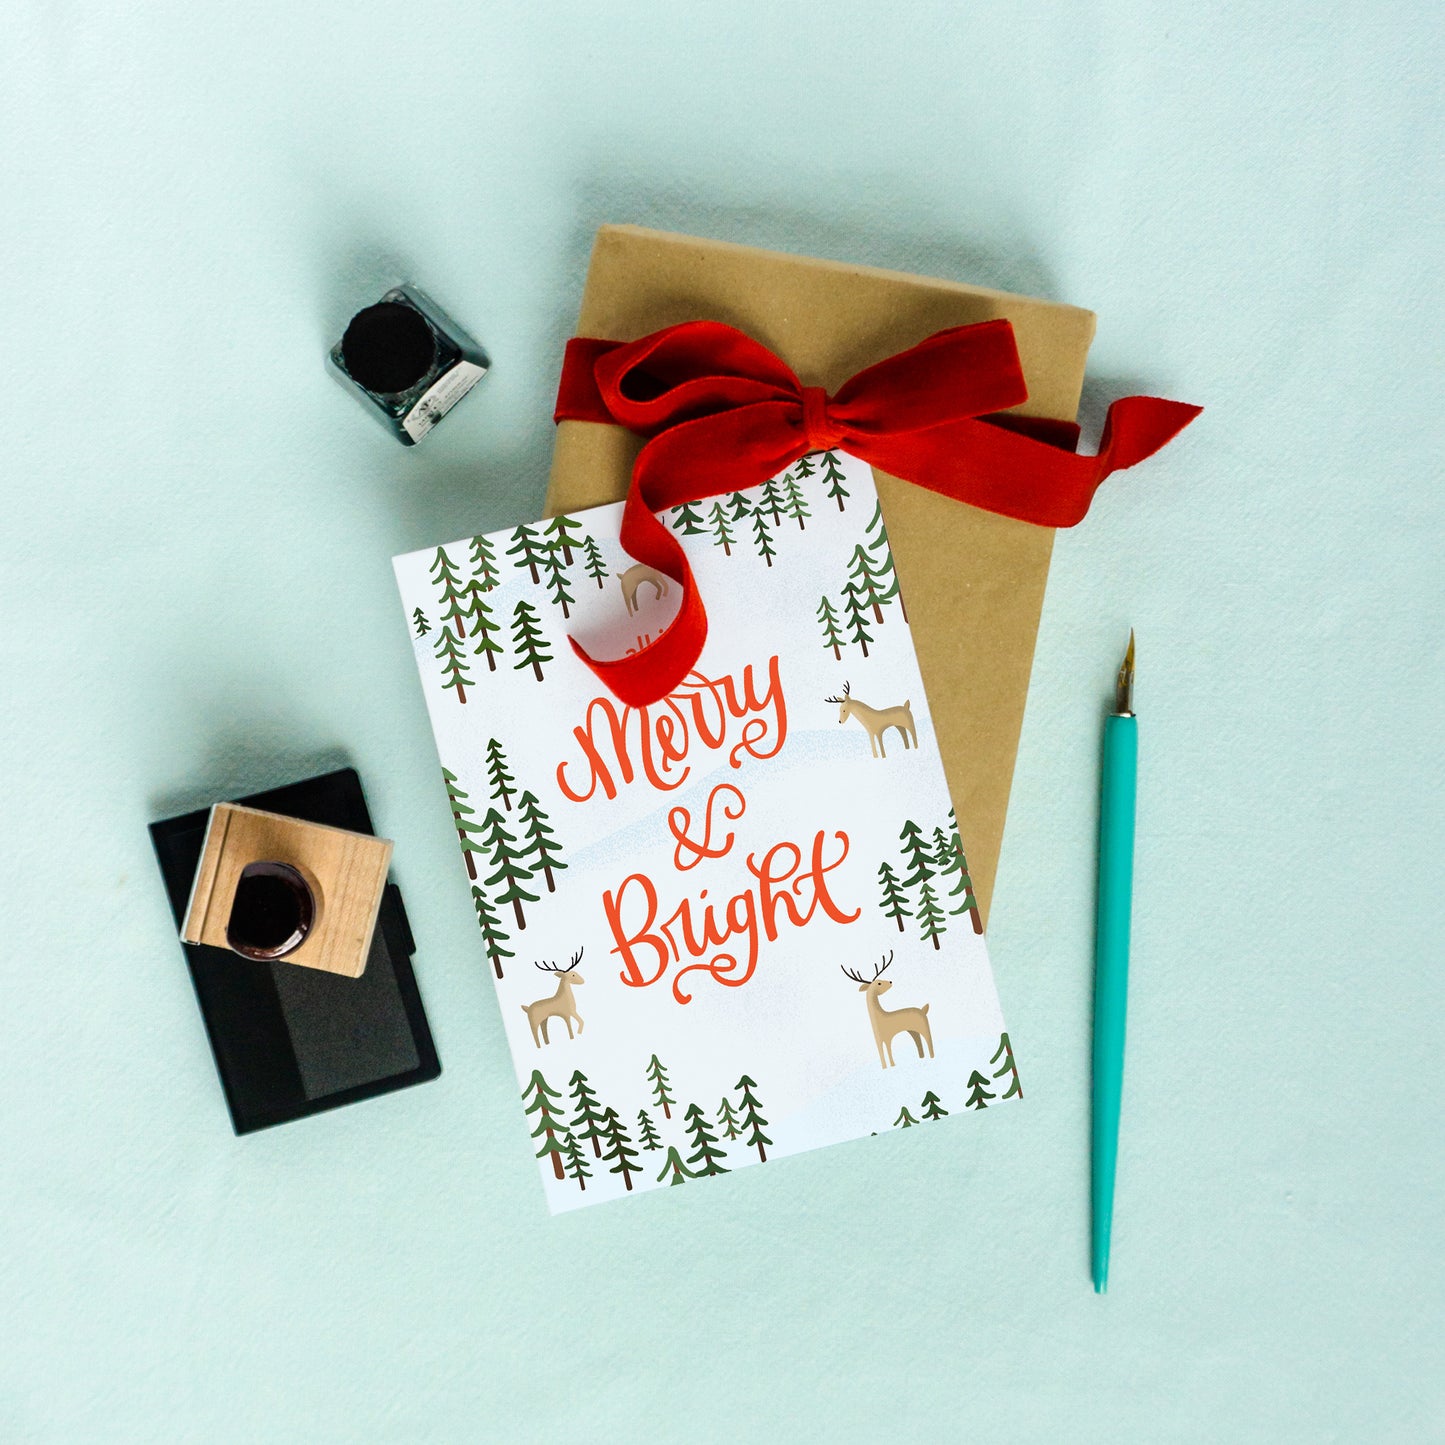 All is Merry & Bright Christmas Card